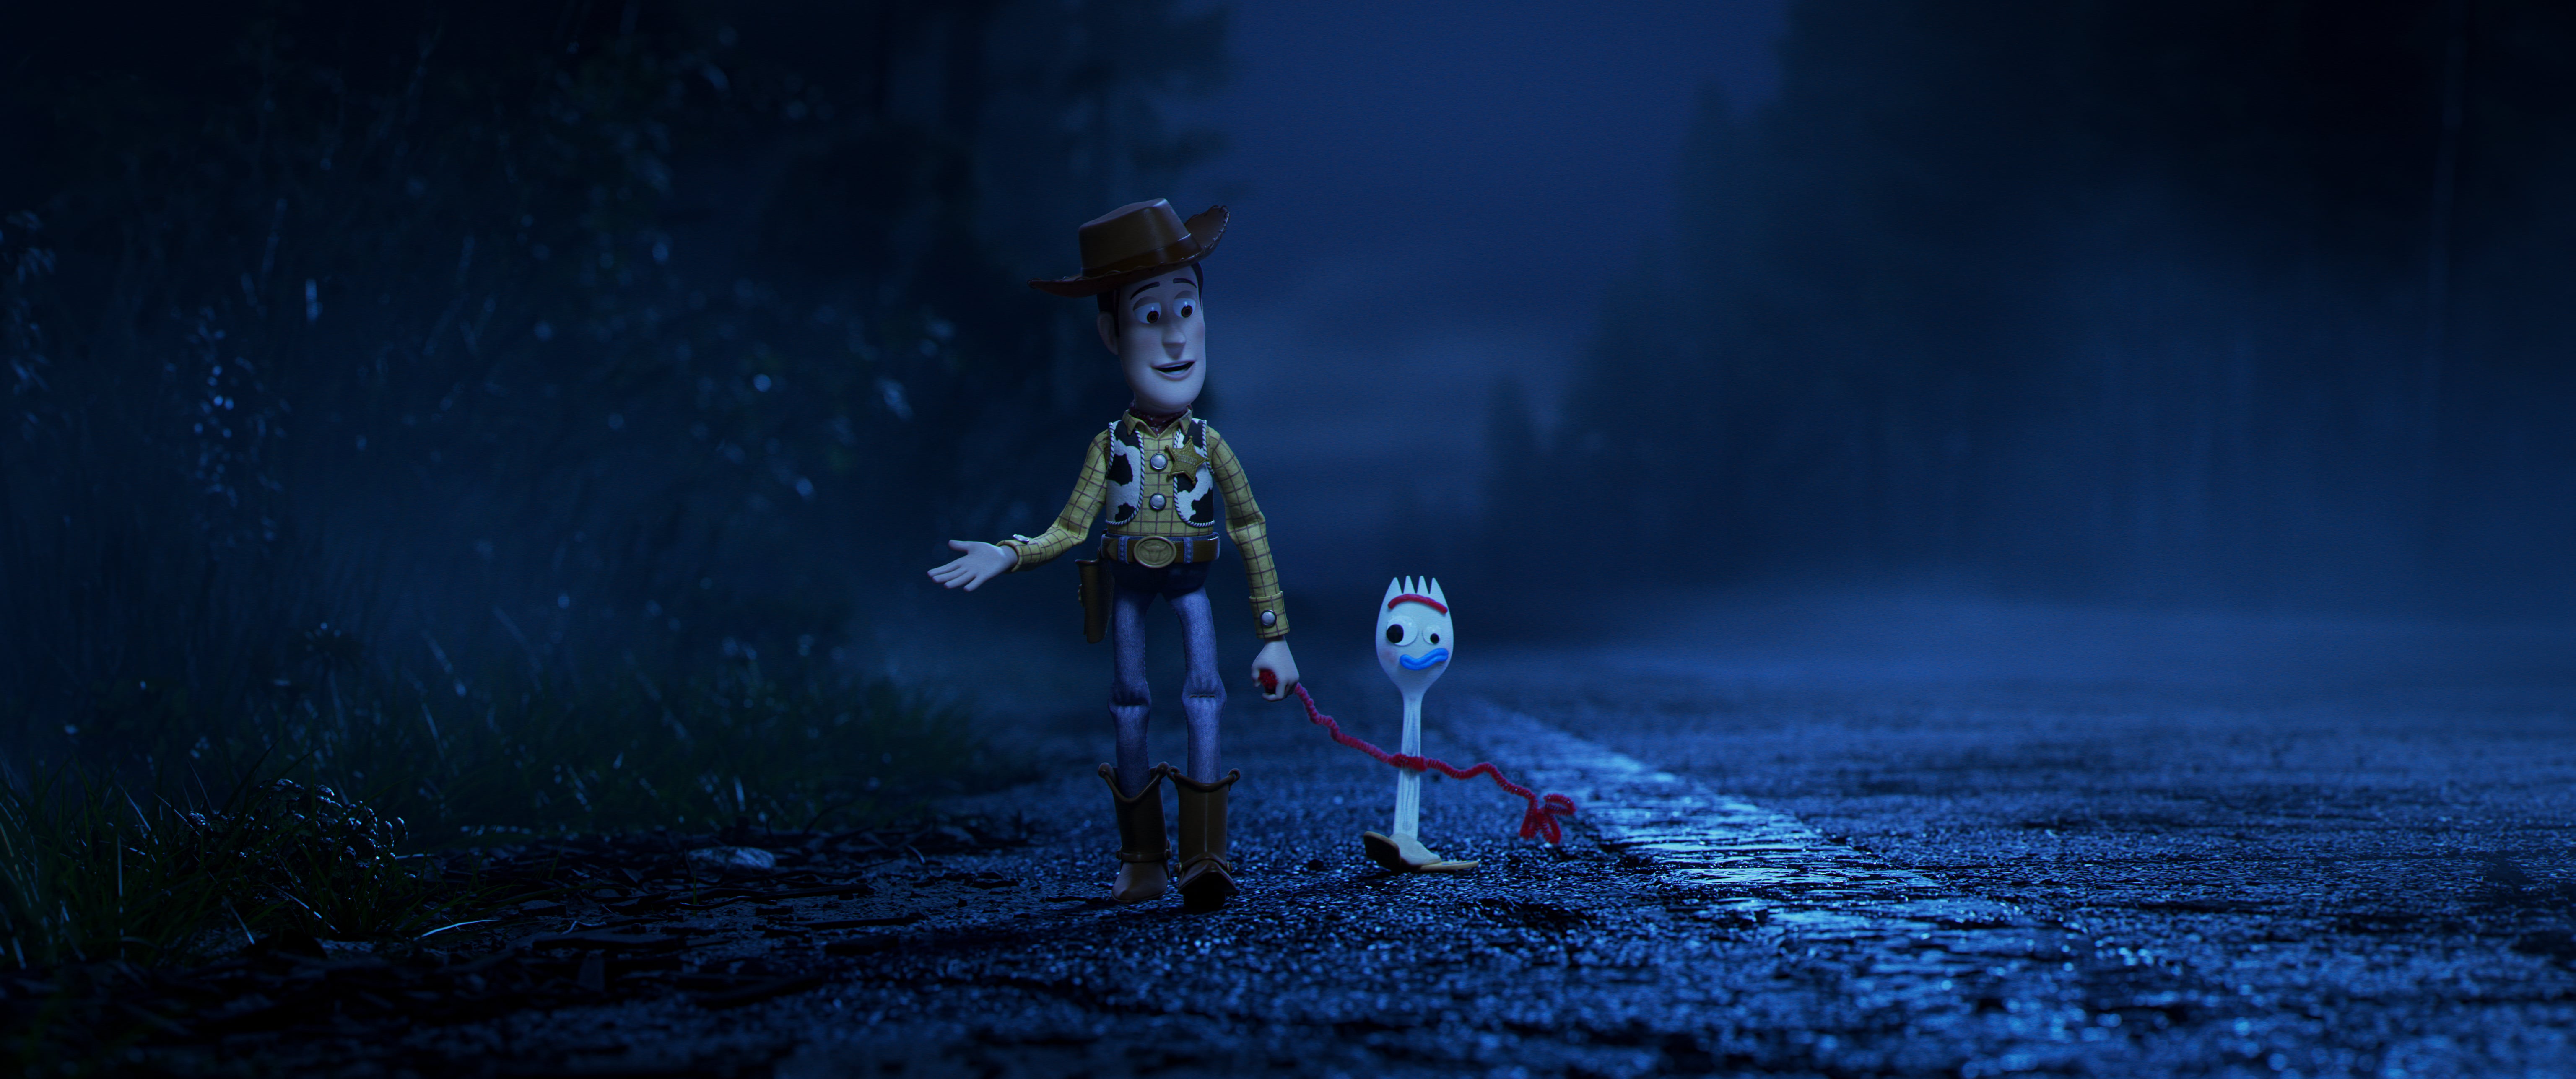 Forky has Bonnie written on his legs, just like Andy's toys. : r/Pixar